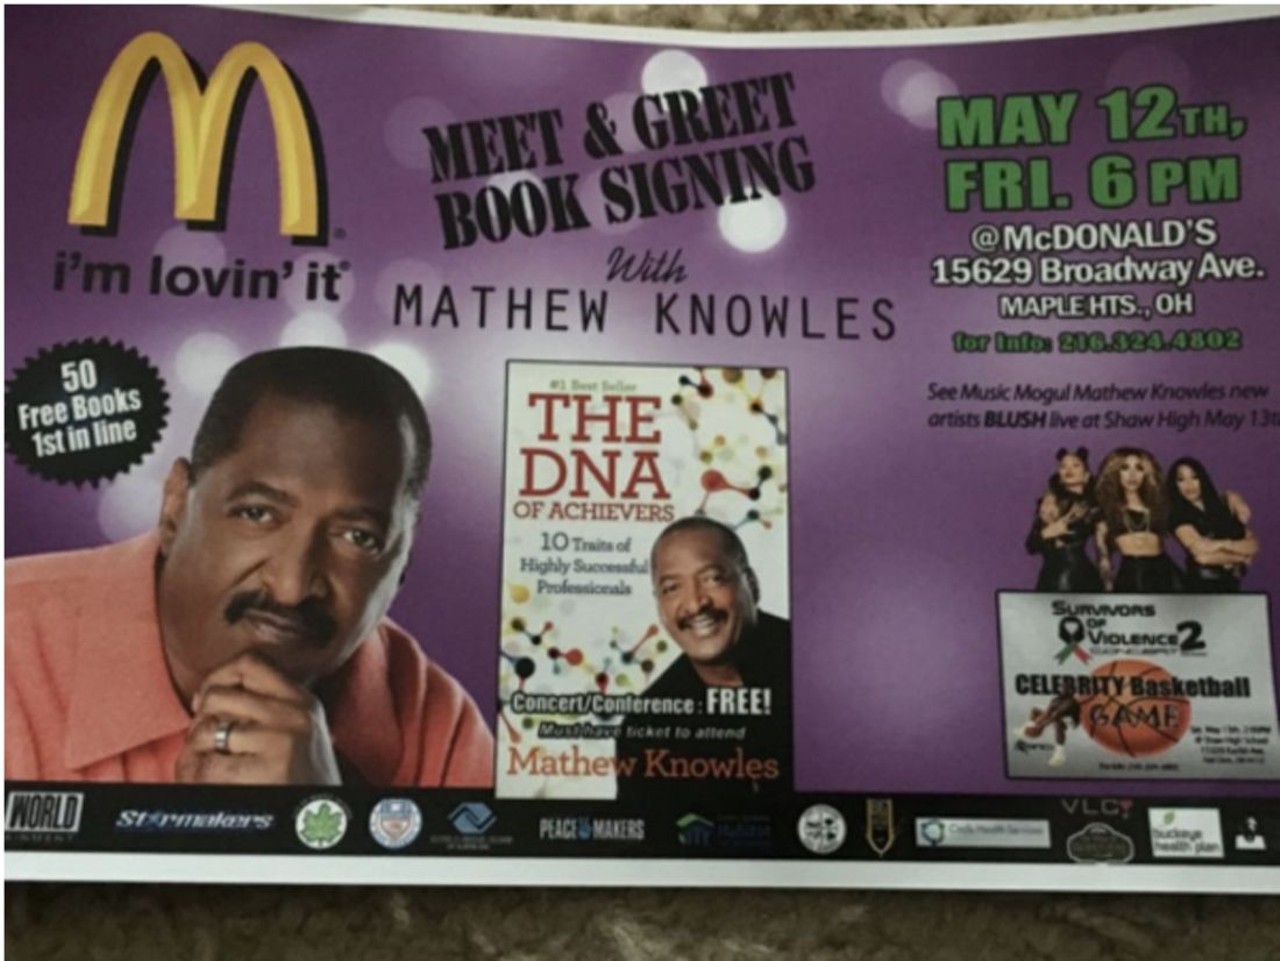  &#147;Beyonce's Dad is Doing a Book Signing Tonight at... a McDonald's in Suburban Cleveland&#148;
May 12
Matthew Knowles, father of Beyonce, may not exactly enjoy the same level of fame as his daughter does. How do we know? When he came to Cleveland for his book signing, to autograph copies of his book, &#147;The DNA of Achievers: 10 Traits of Highly Successful People,&#148; the appearance took place at a McDonald&#146;s in Maple Heights.
Photo via Scene Archives